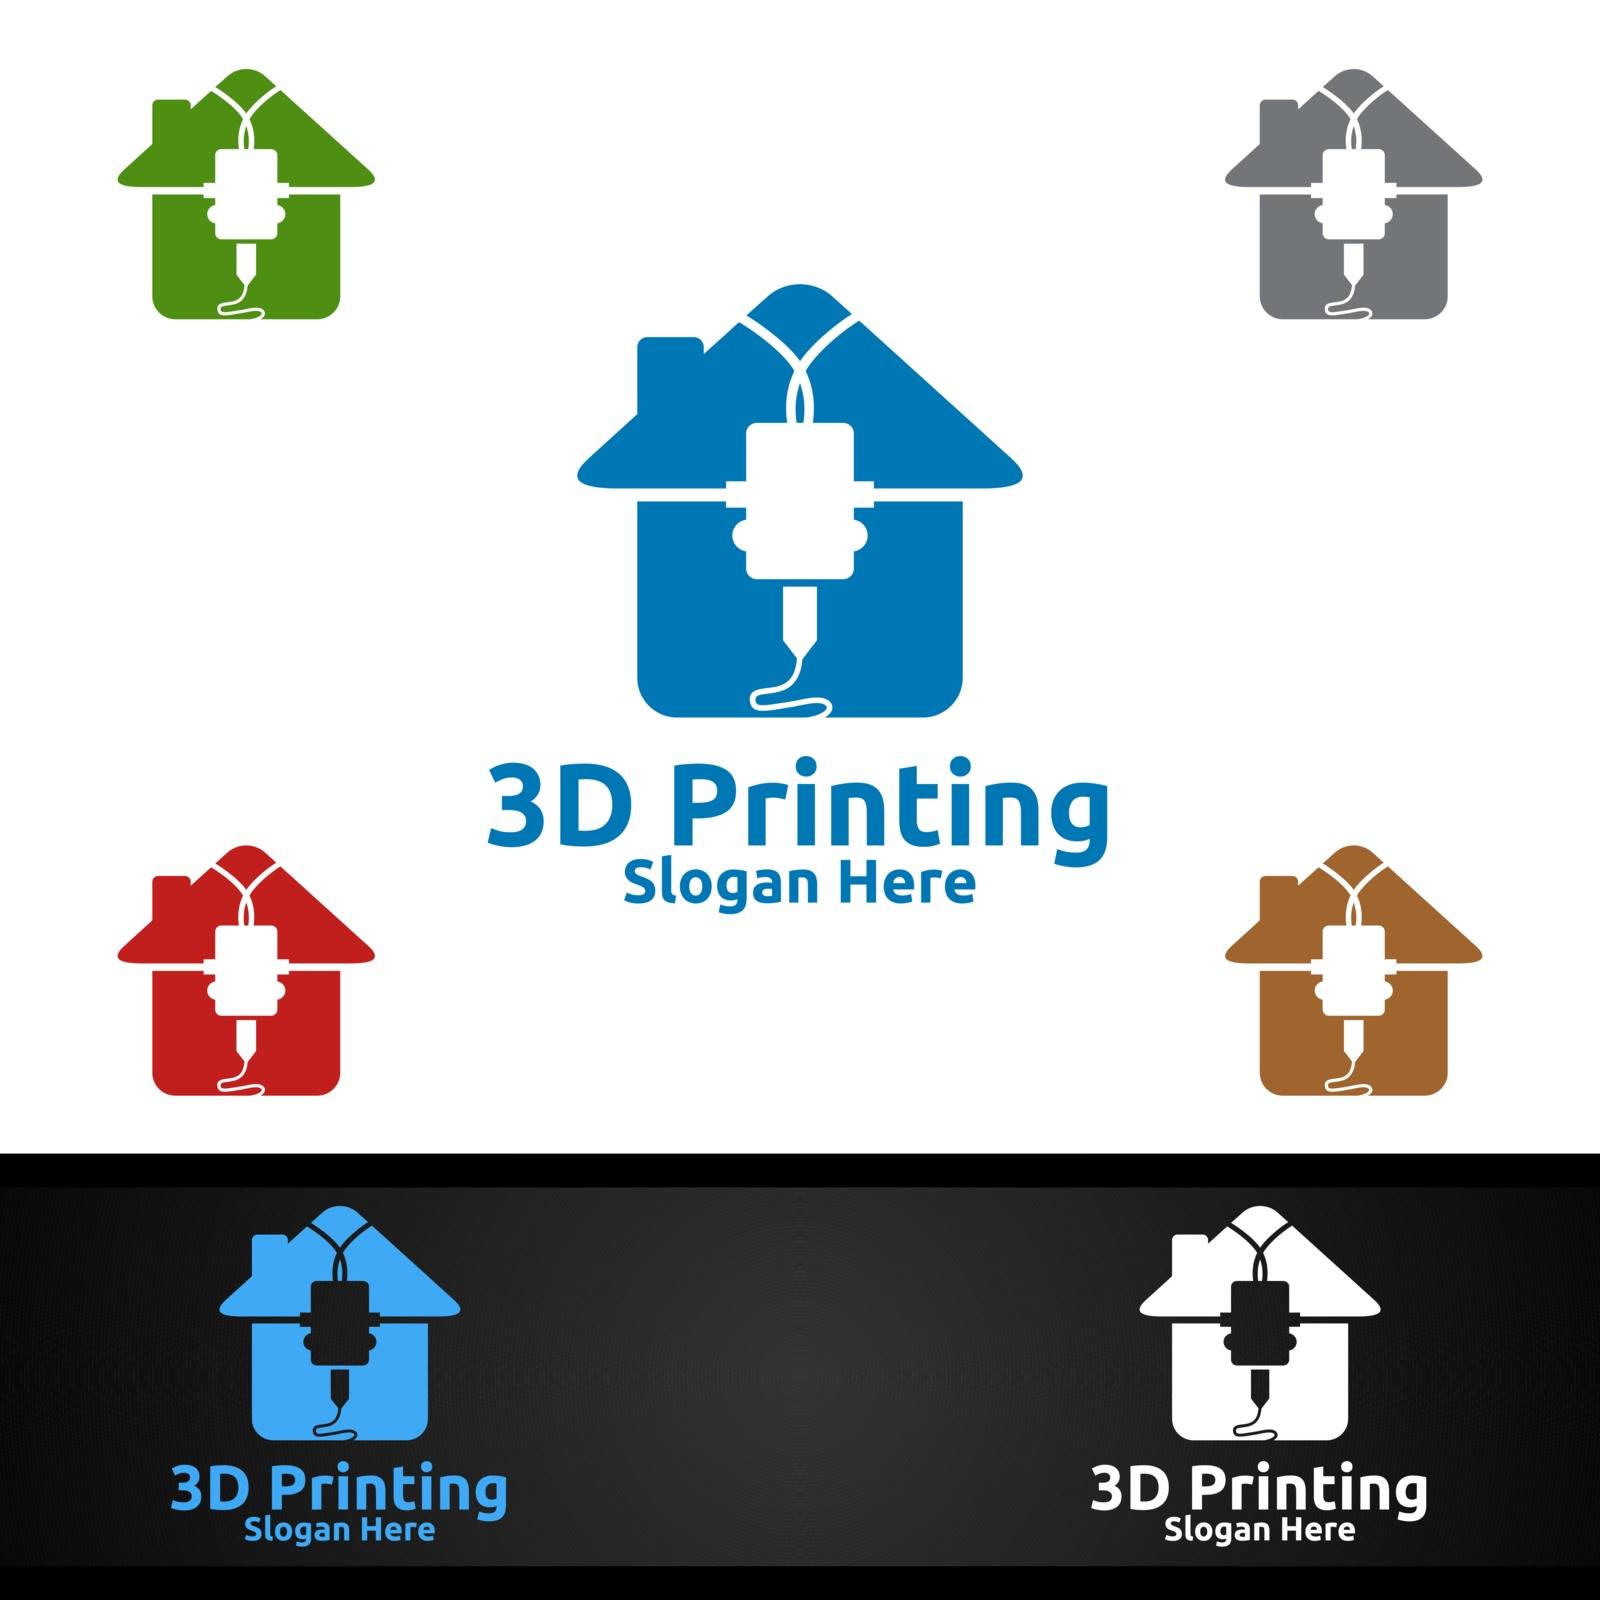 Home 3D Printing Company Vector Logo Design for Media, Retail, Advertising, Newspaper or Book Concept by denayuneyi